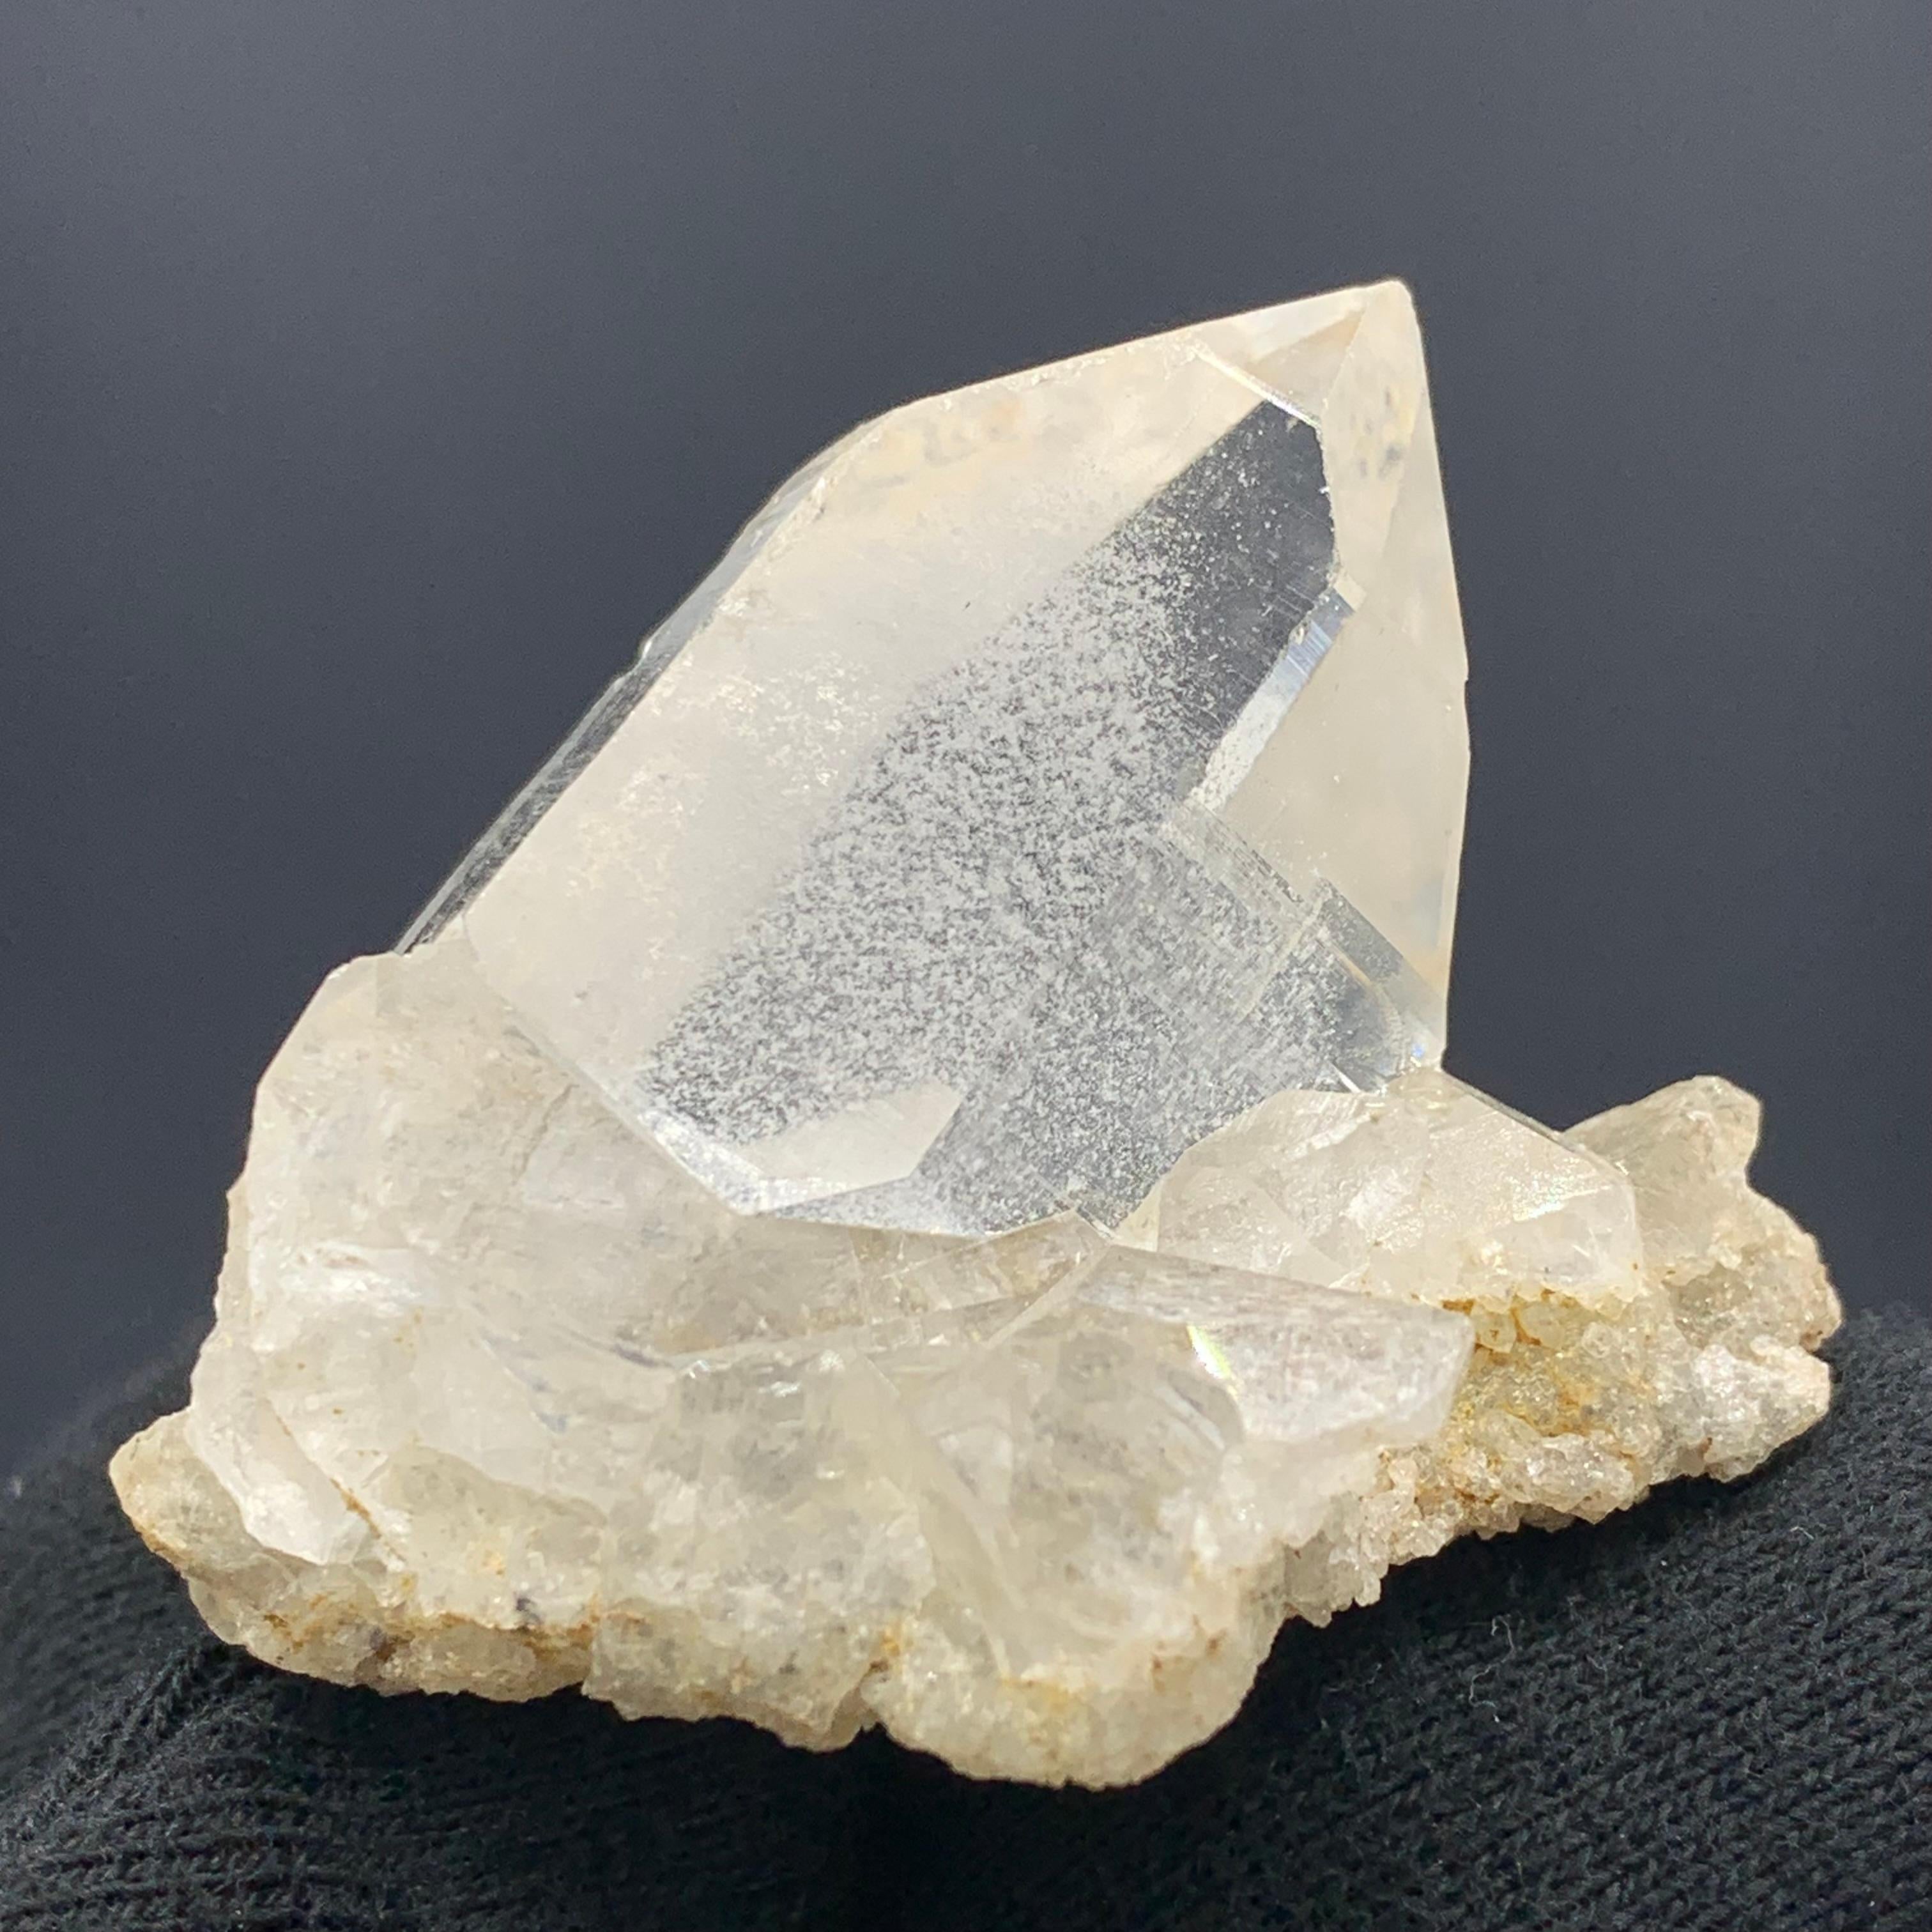 41.37 Gram Lovely Quartz Specimen From Skardu, Pakistan 

Weight: 41.37 Gram 
Dimension: 3.4 x 4.6 x 3.2 Cm
Origin: Skardu, Pakistan 

Quartz is one of the most common minerals in the Earth's crust. As a mineral name, quartz refers to a specific